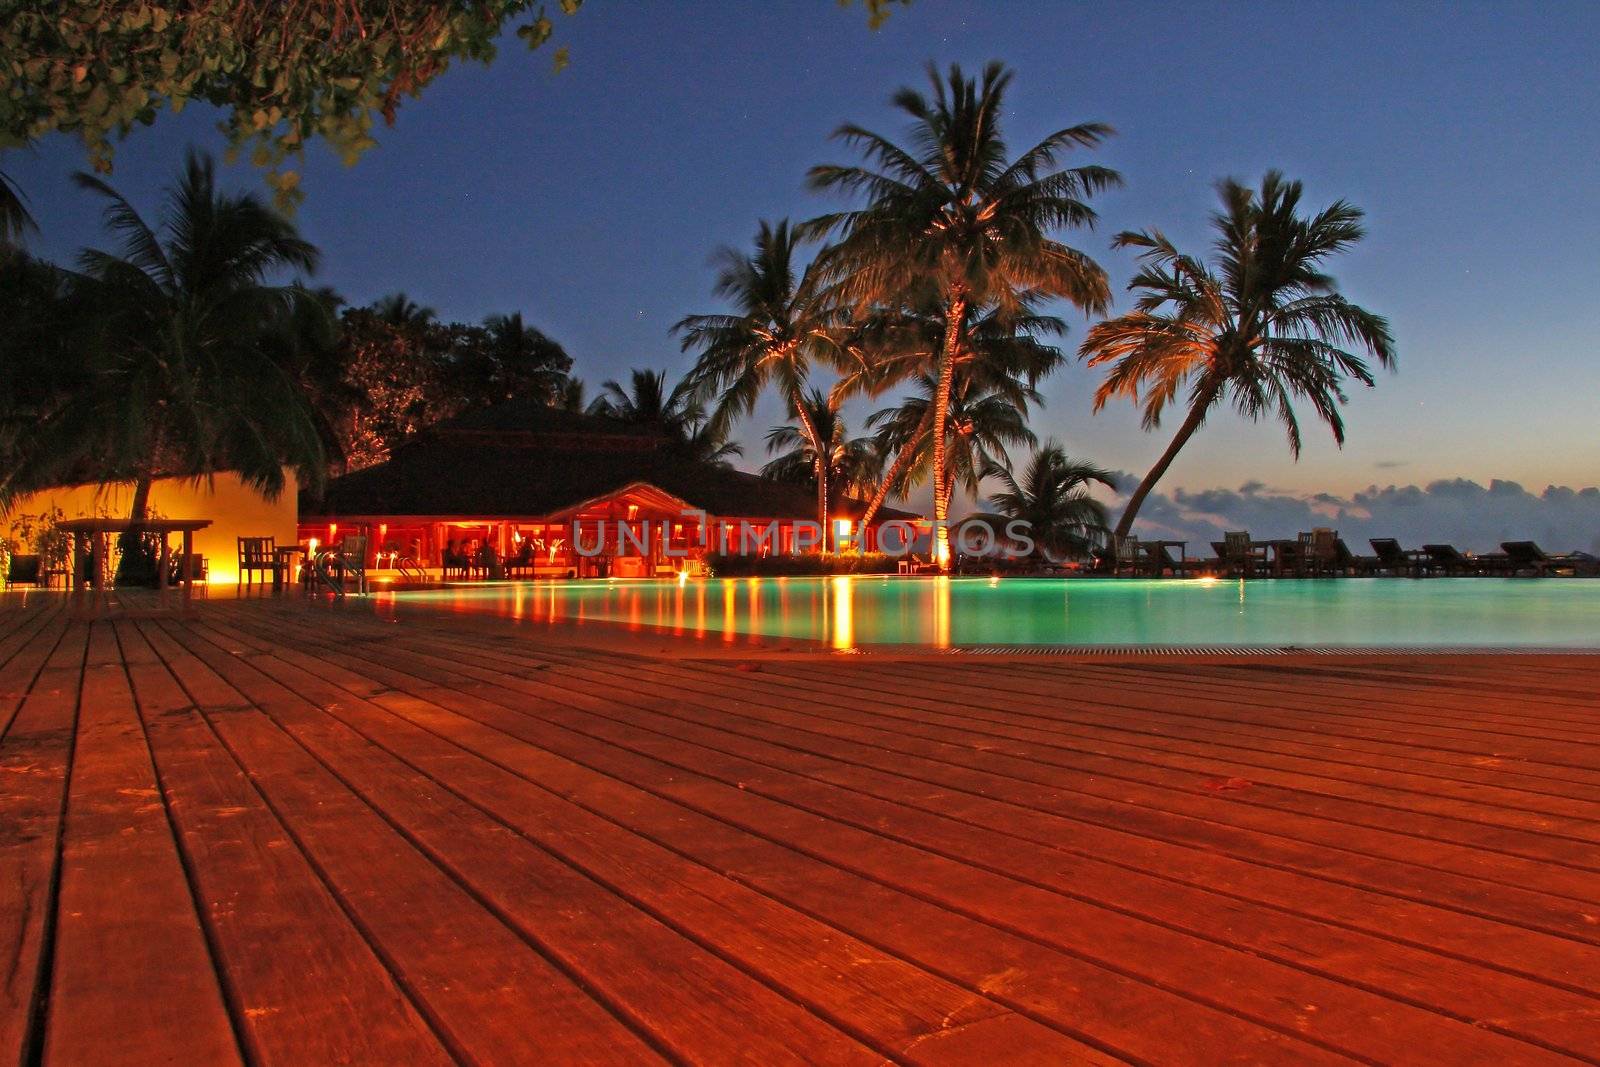 Poolview photographed in the evening at Meeru, Maldives